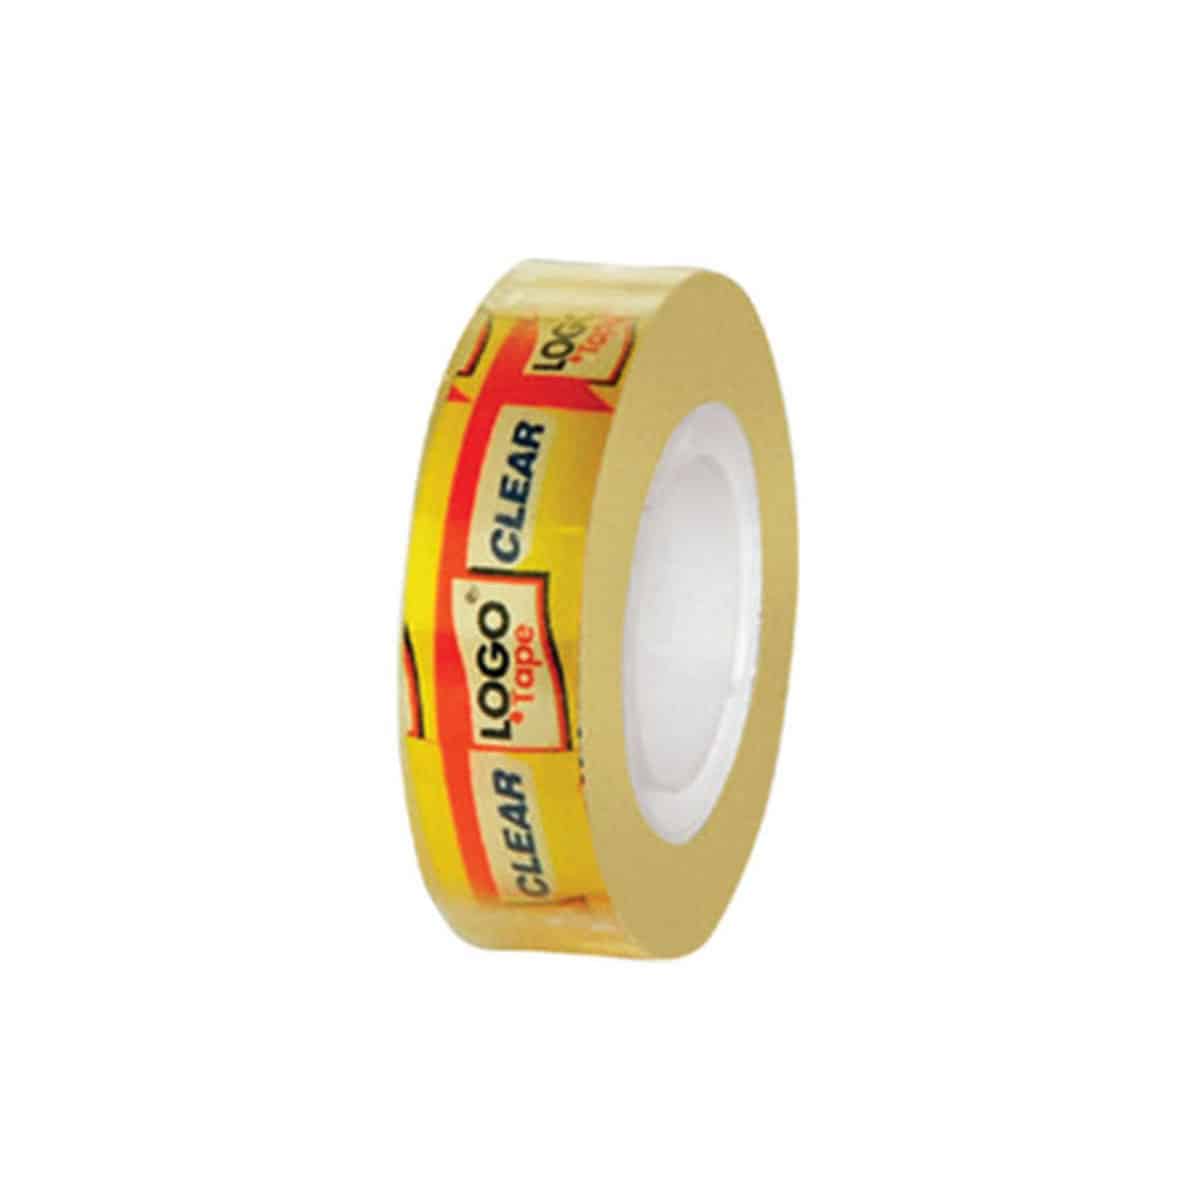 LOGO Cellotape Clear 15 mm * 33m